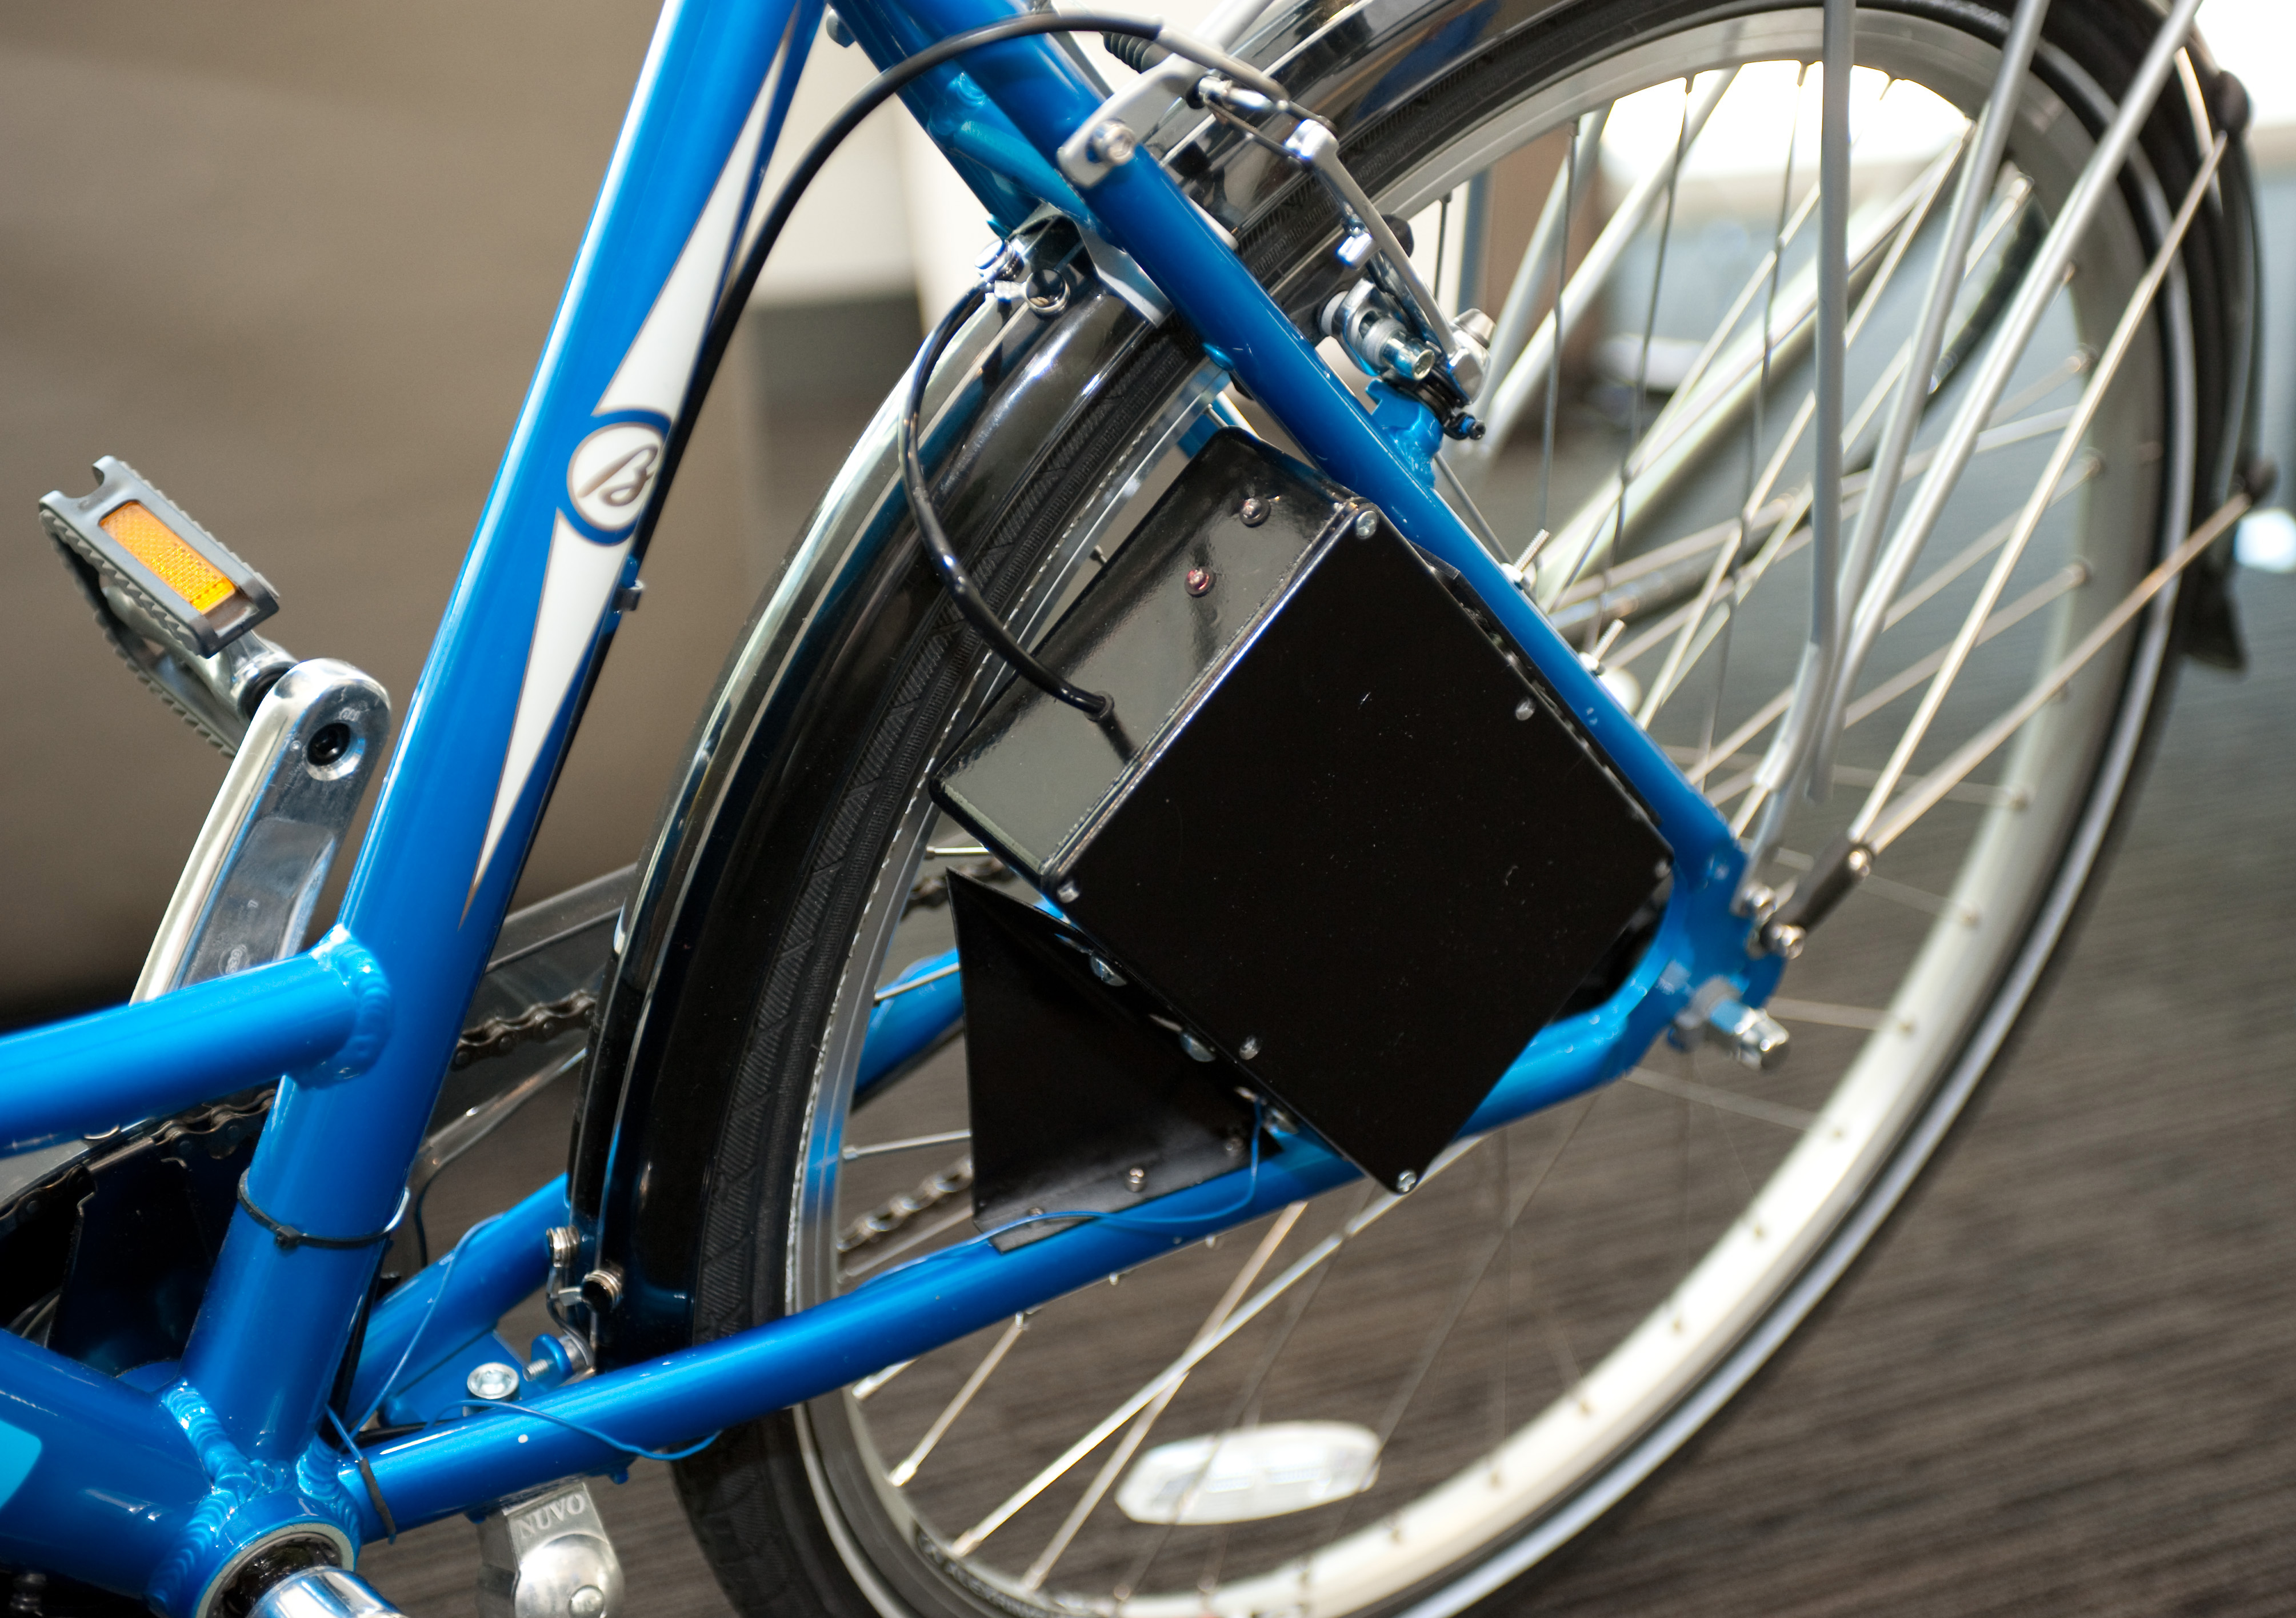 Georgia Tech students developed a distribution system for bike share programs.  The new technology, called viaCycle, tracks bikes and allows for easy distribution of bikes in an urban setting.